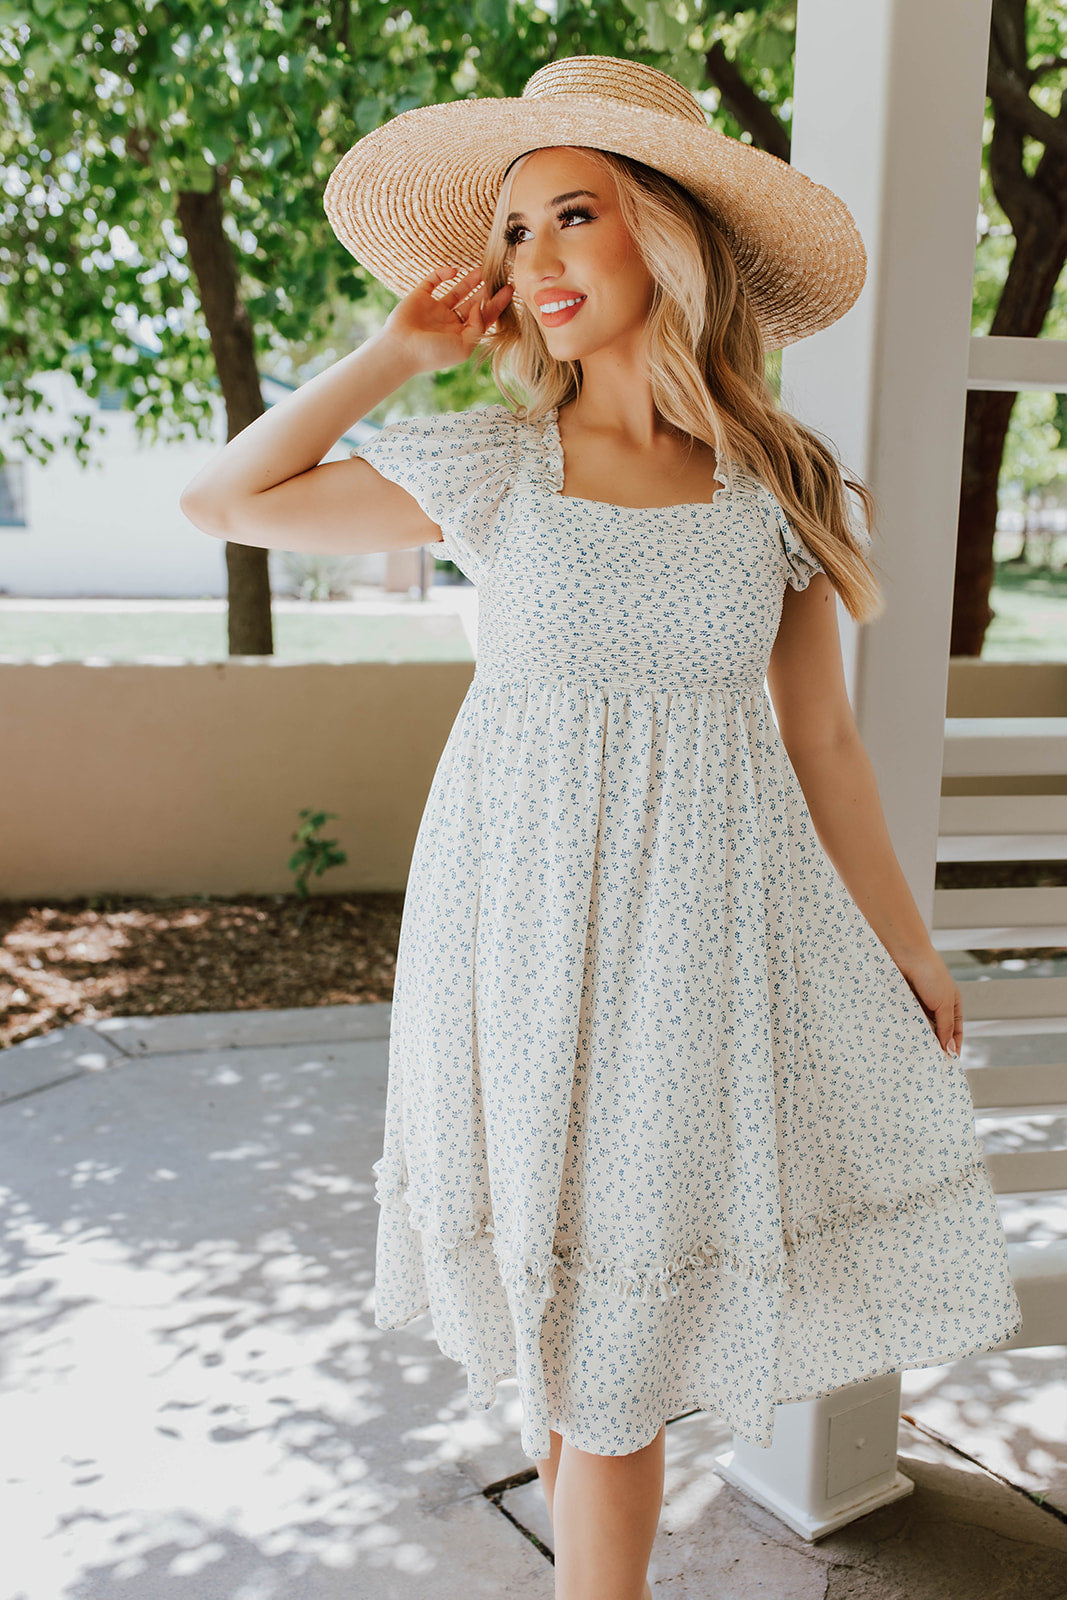 THE TEA PARTY DRESS IN DAINTY BLUE FLORAL BY PINK DESERT